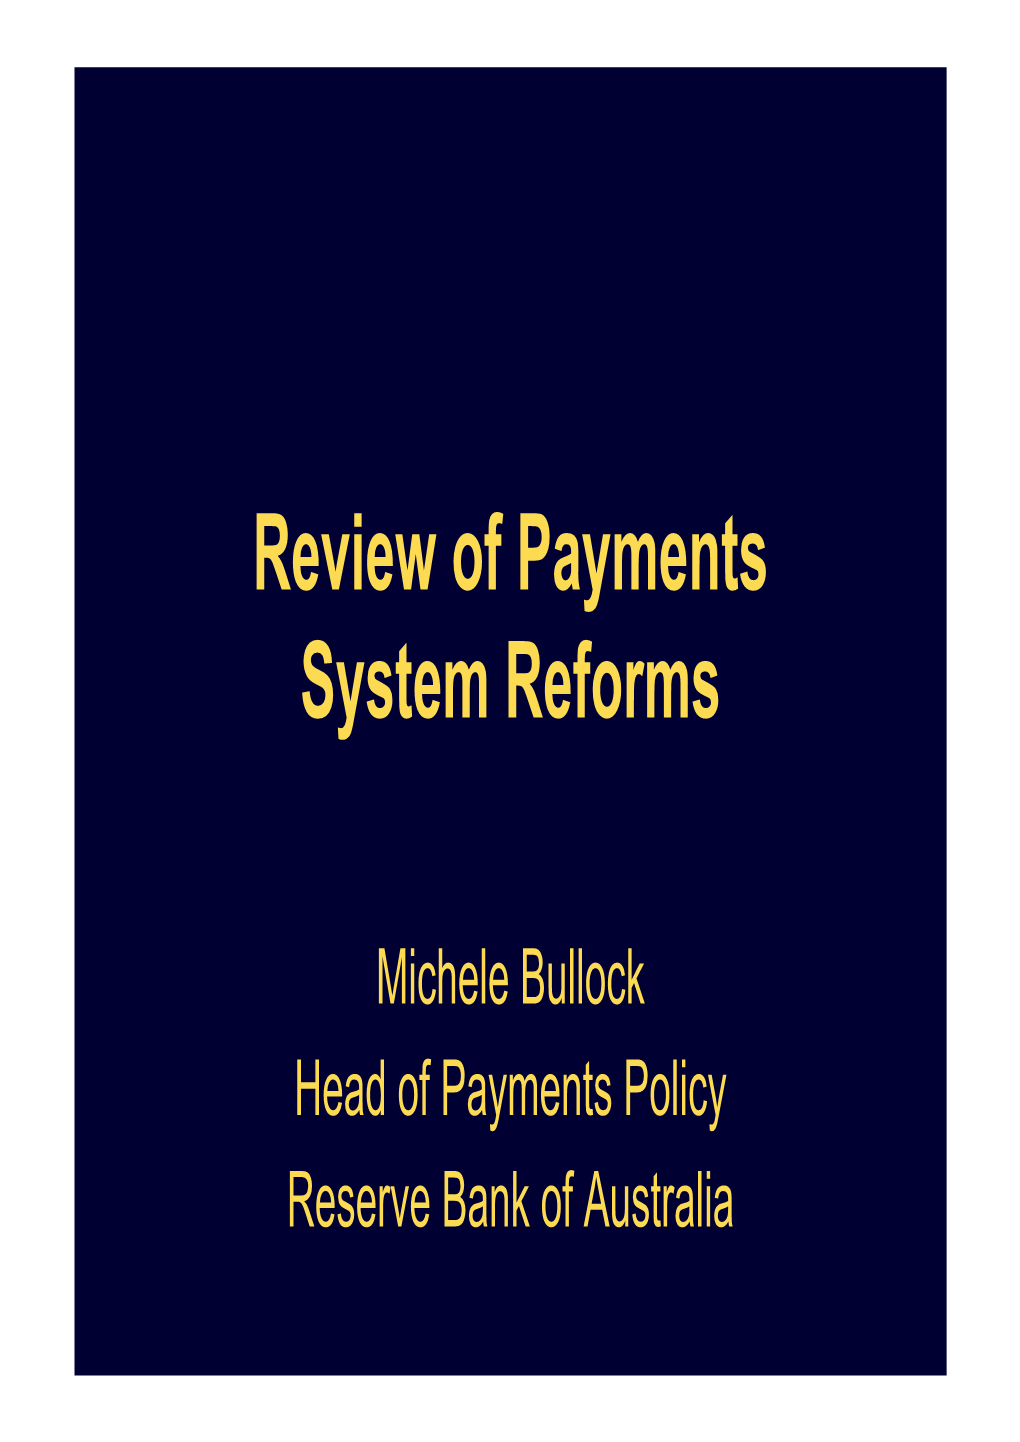 Presentation to Australian Smart Cards Summit 2007: Review of Payments System Reforms